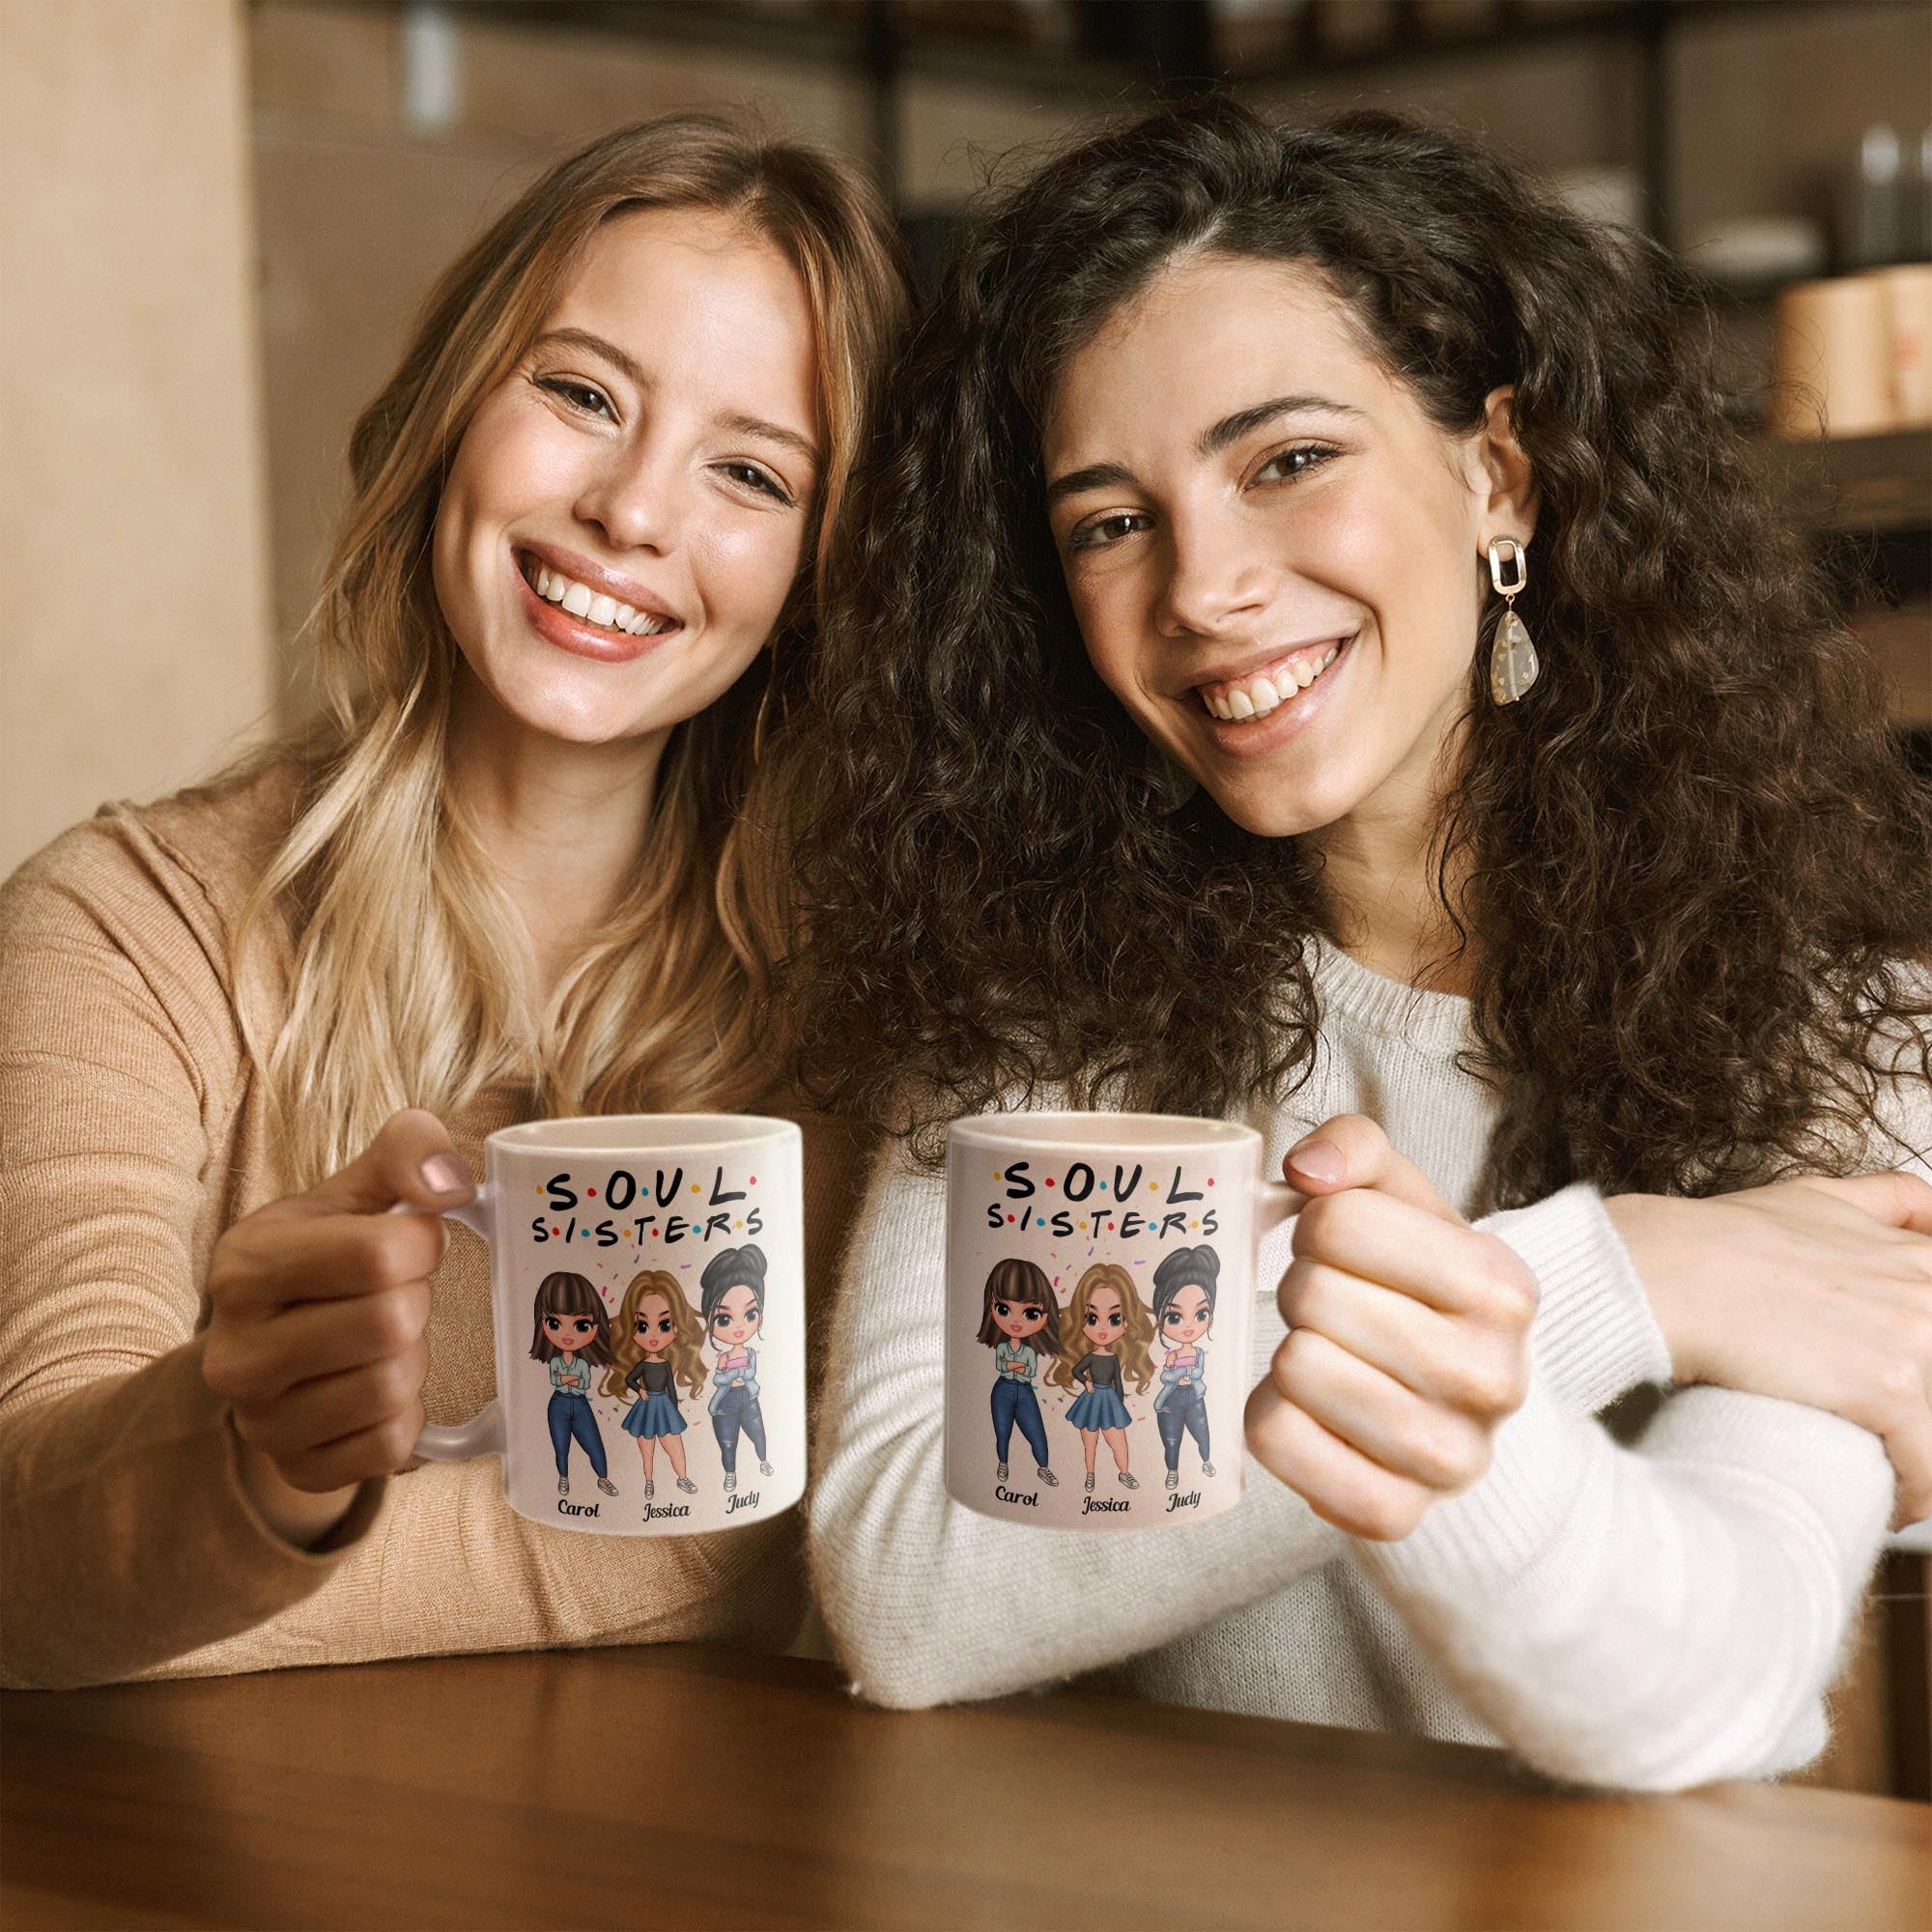 Soul Sisters - Personalized Mug - Birthday, Christmas Gift For BFF, Best Friends, Besties, Soul Sisters - Cute Fashion Dolls